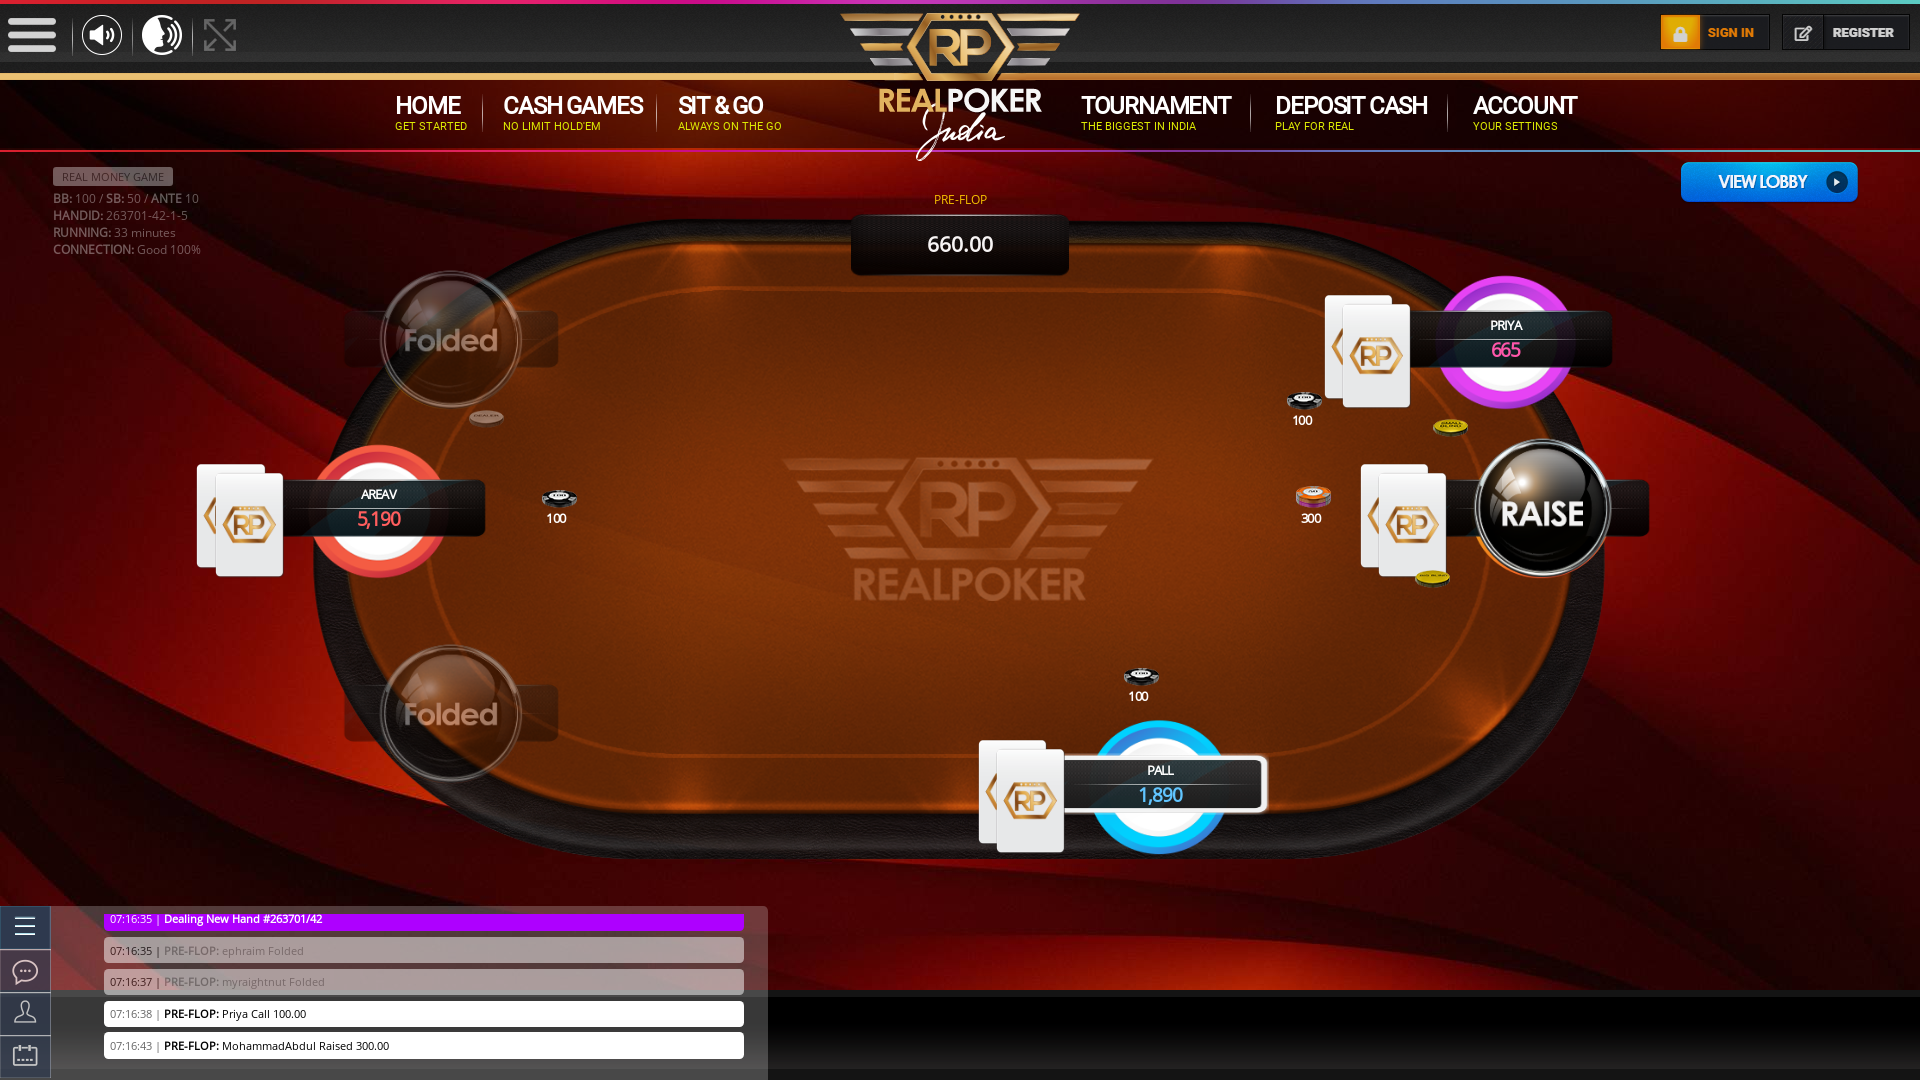 Howrah, Kolkata poker table on a 10 player table in the 33rd minute